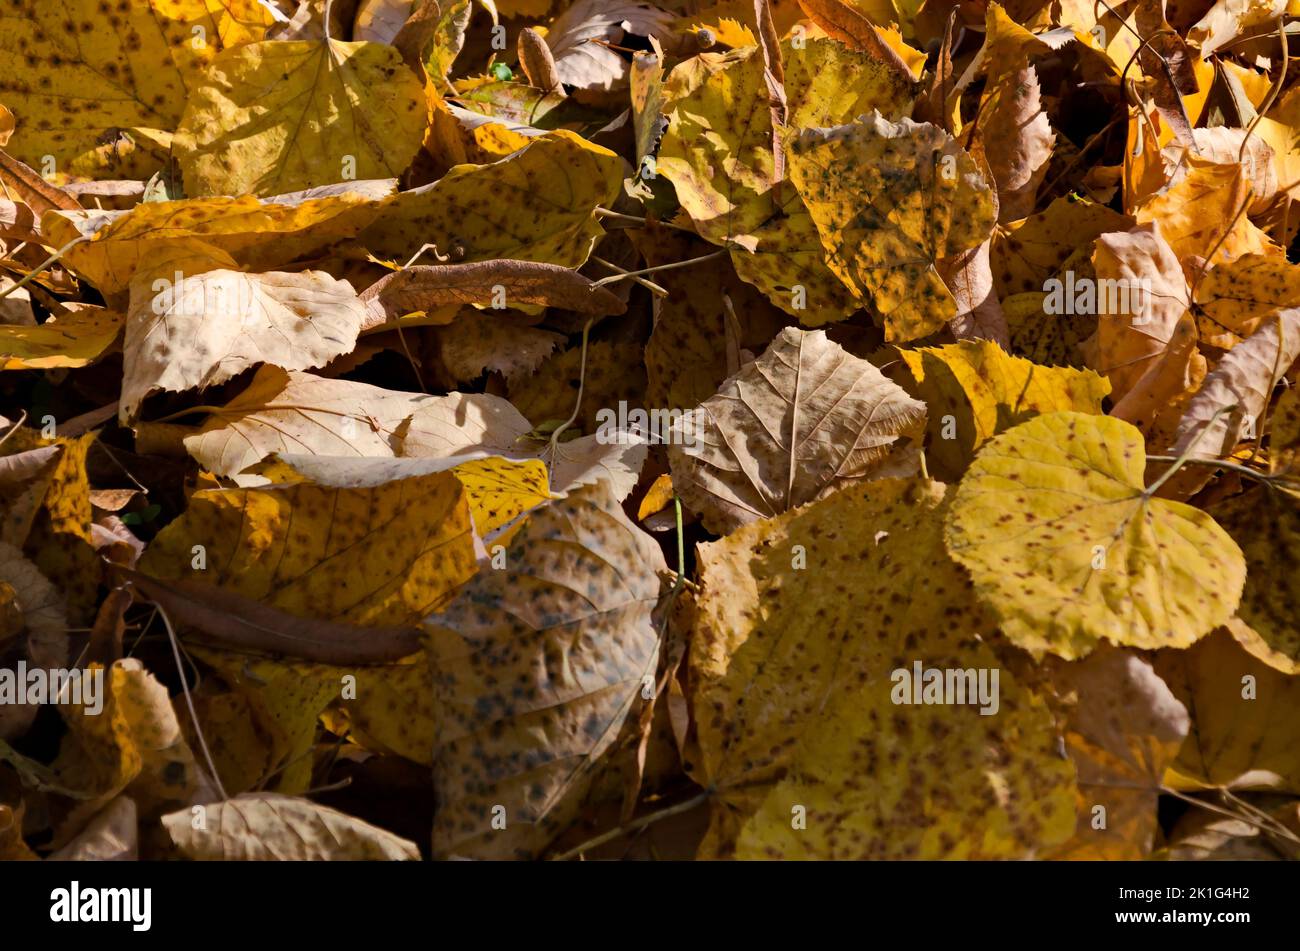 Background of fallen yellow leaves in an autumn forest, Sofia, Bulgaria Stock Photo